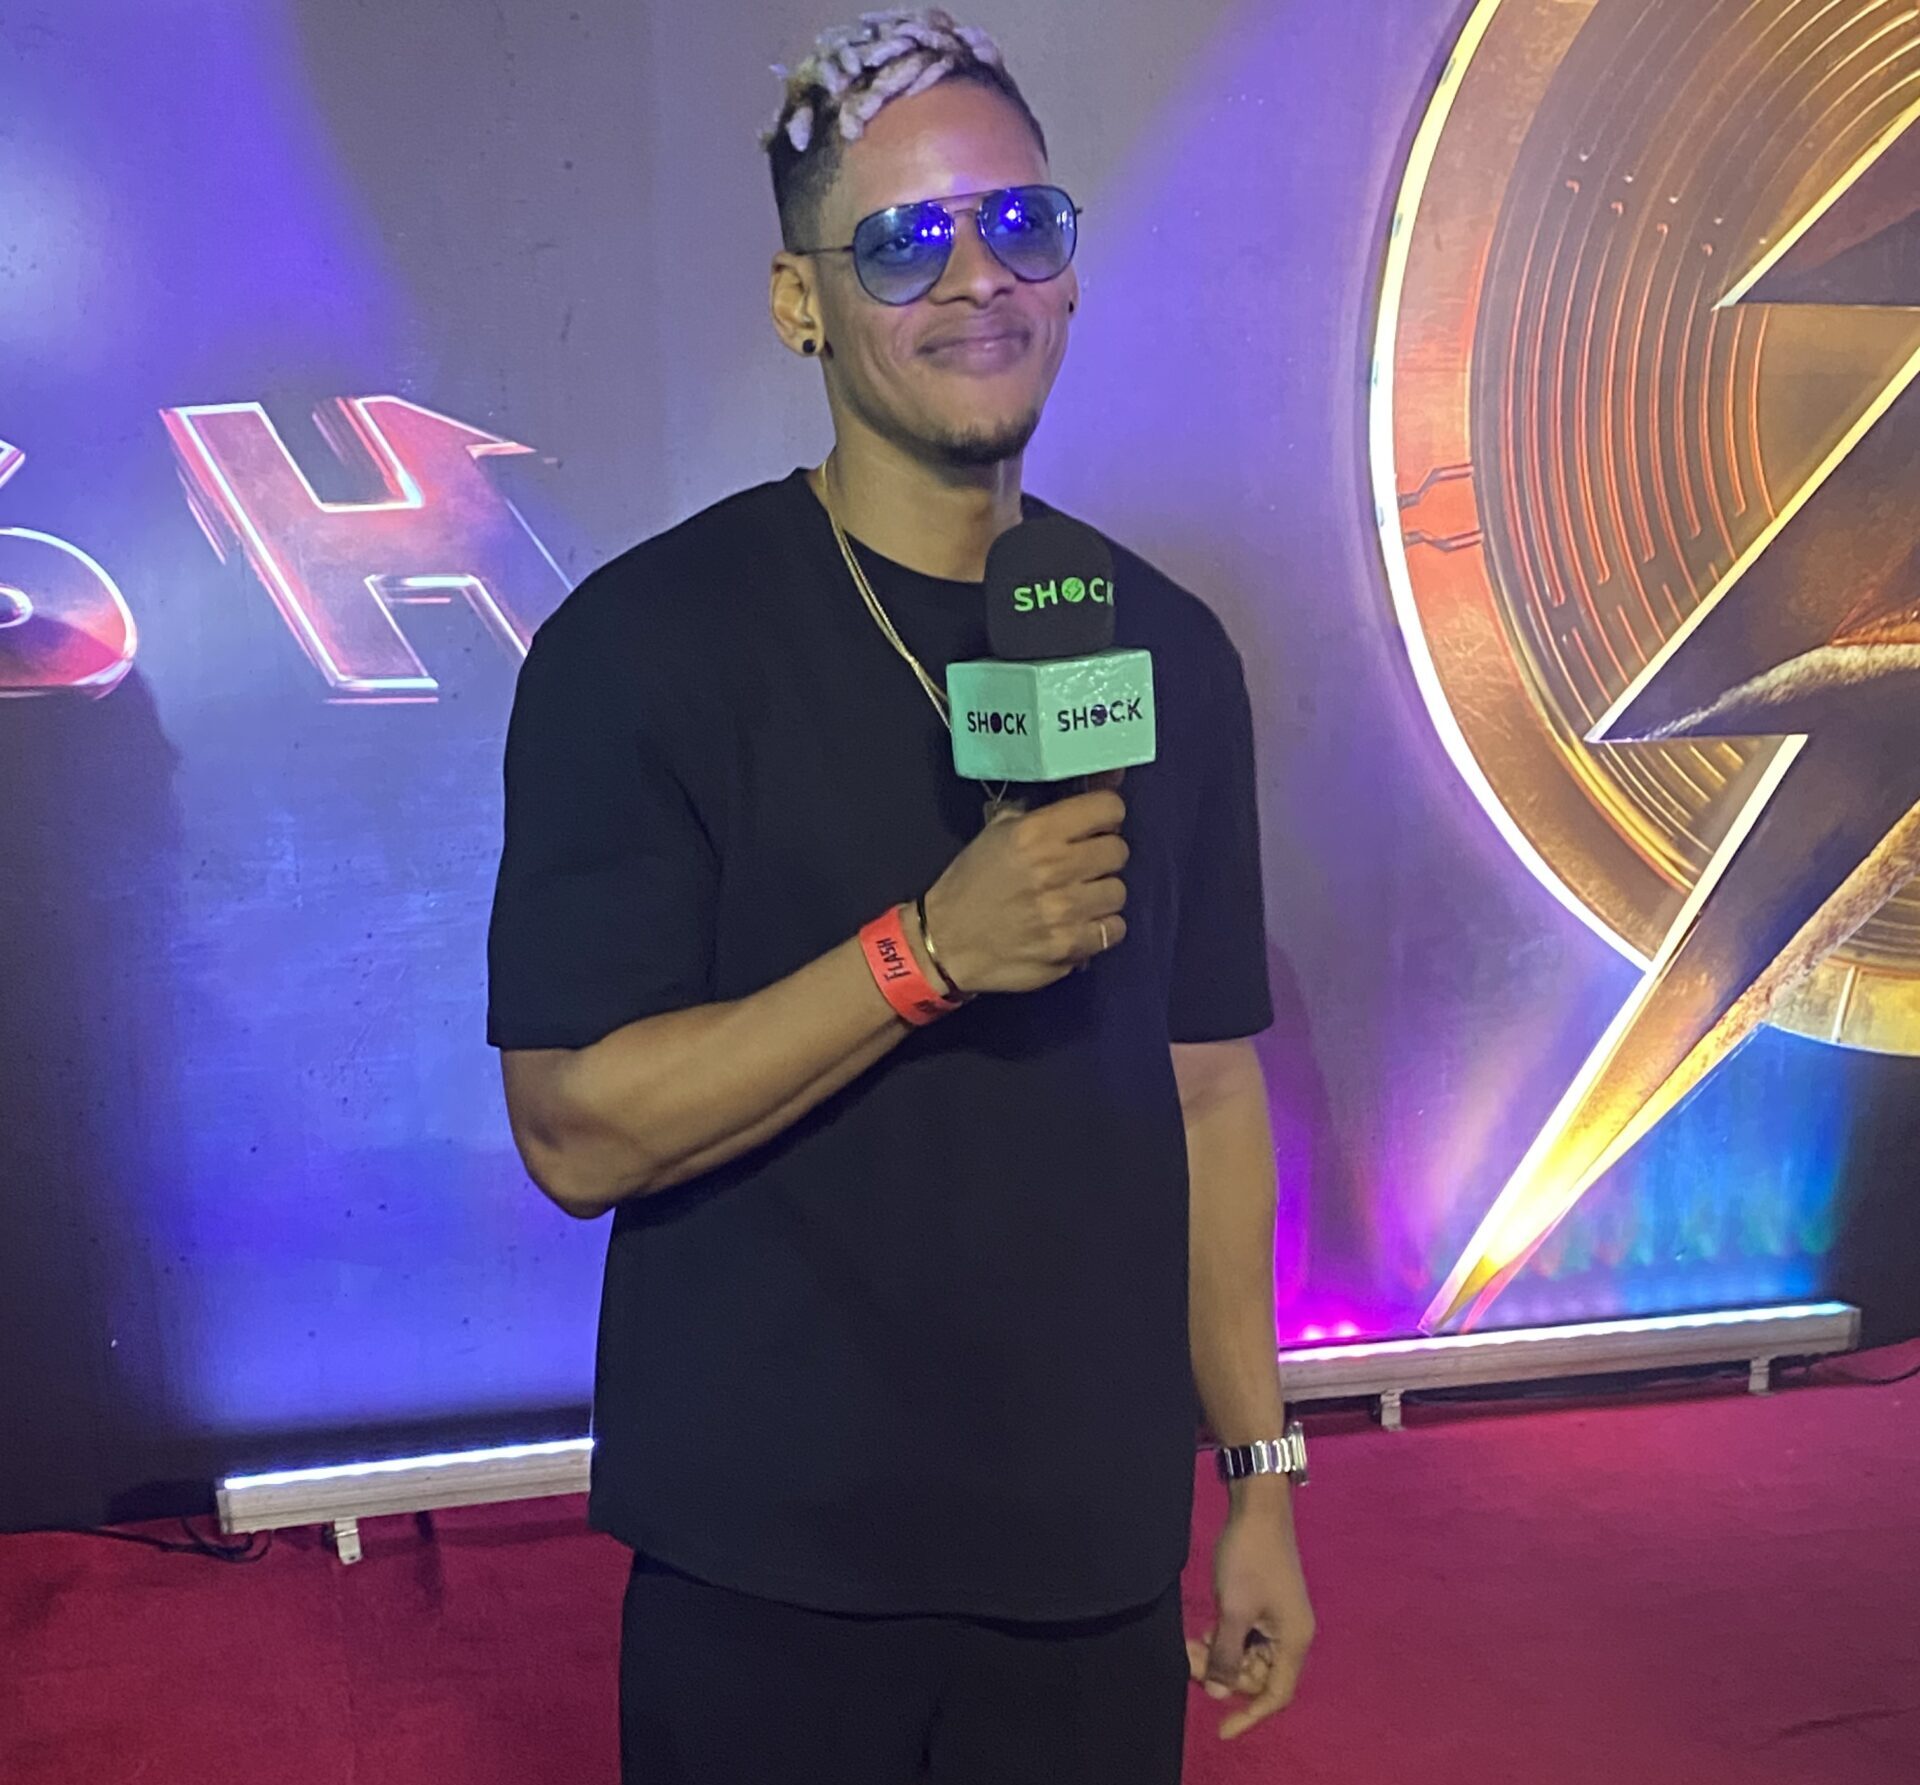 image 67163137 scaled e1687384379771 - The Flash Movie - Nigeria Buzzy Premiere Event & Highlights